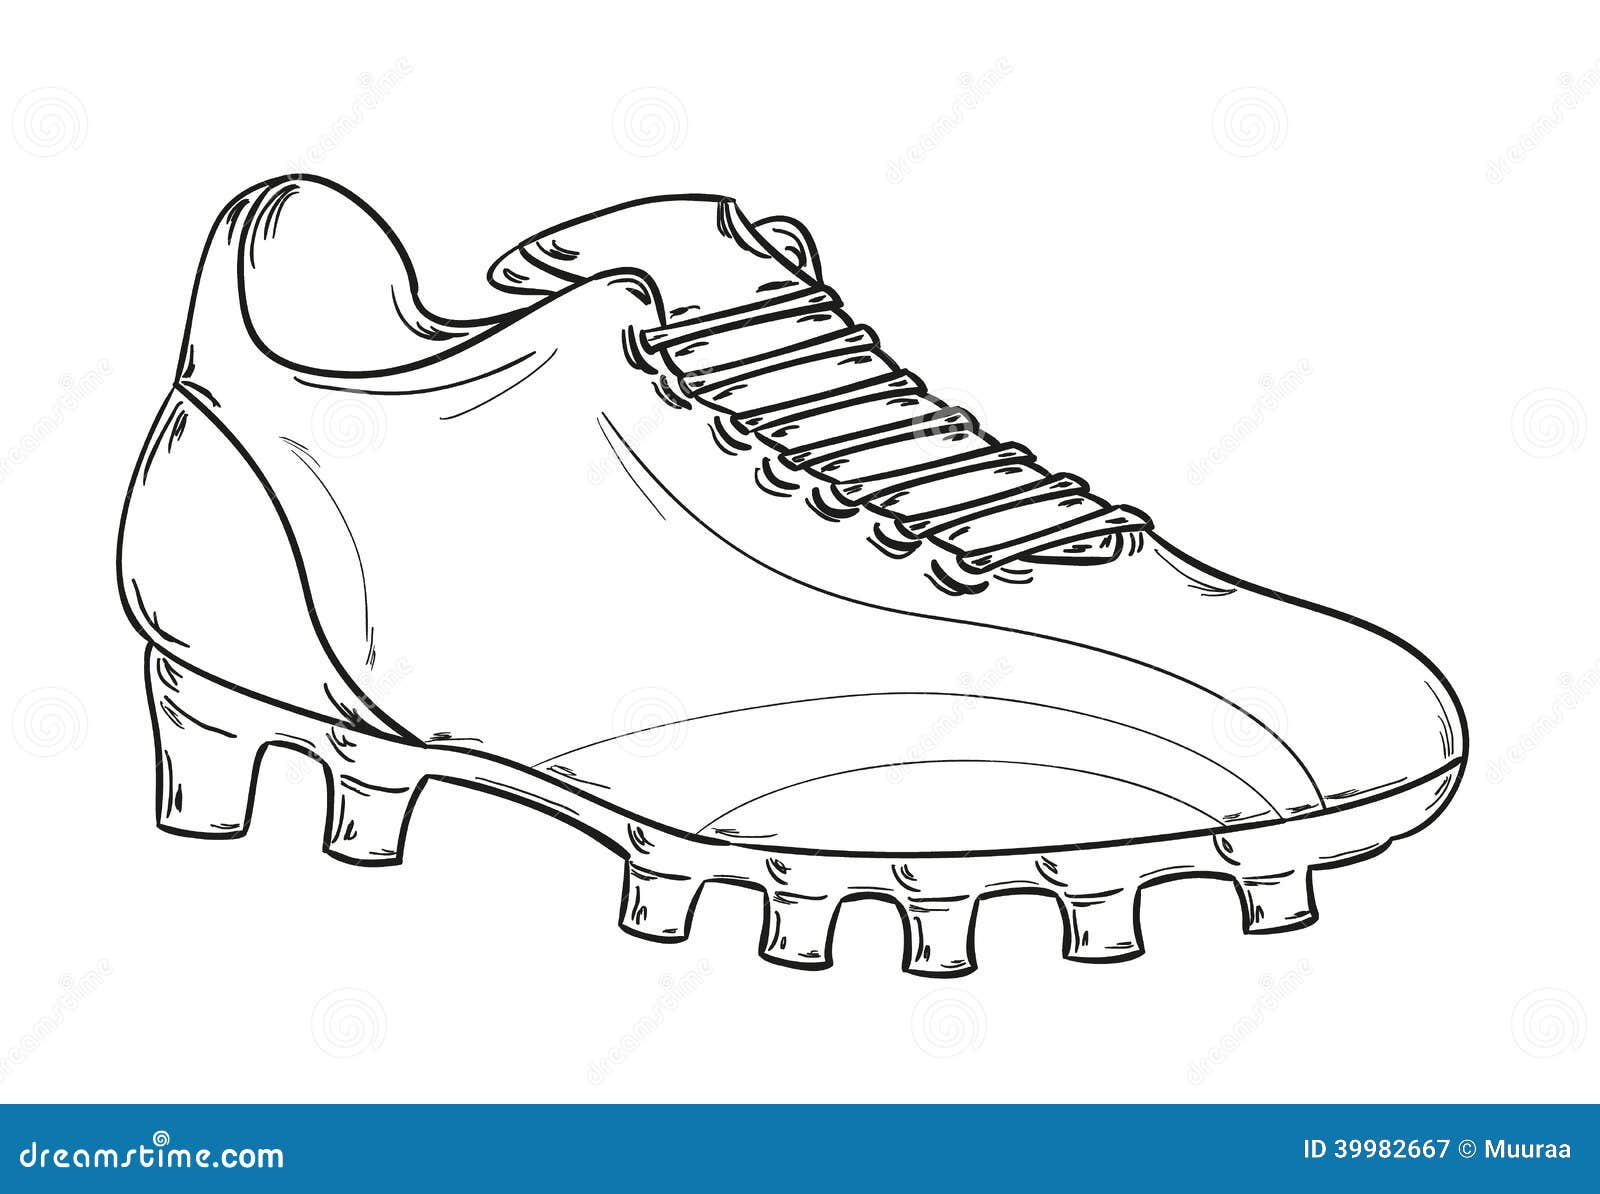 football shoes clipart - photo #37